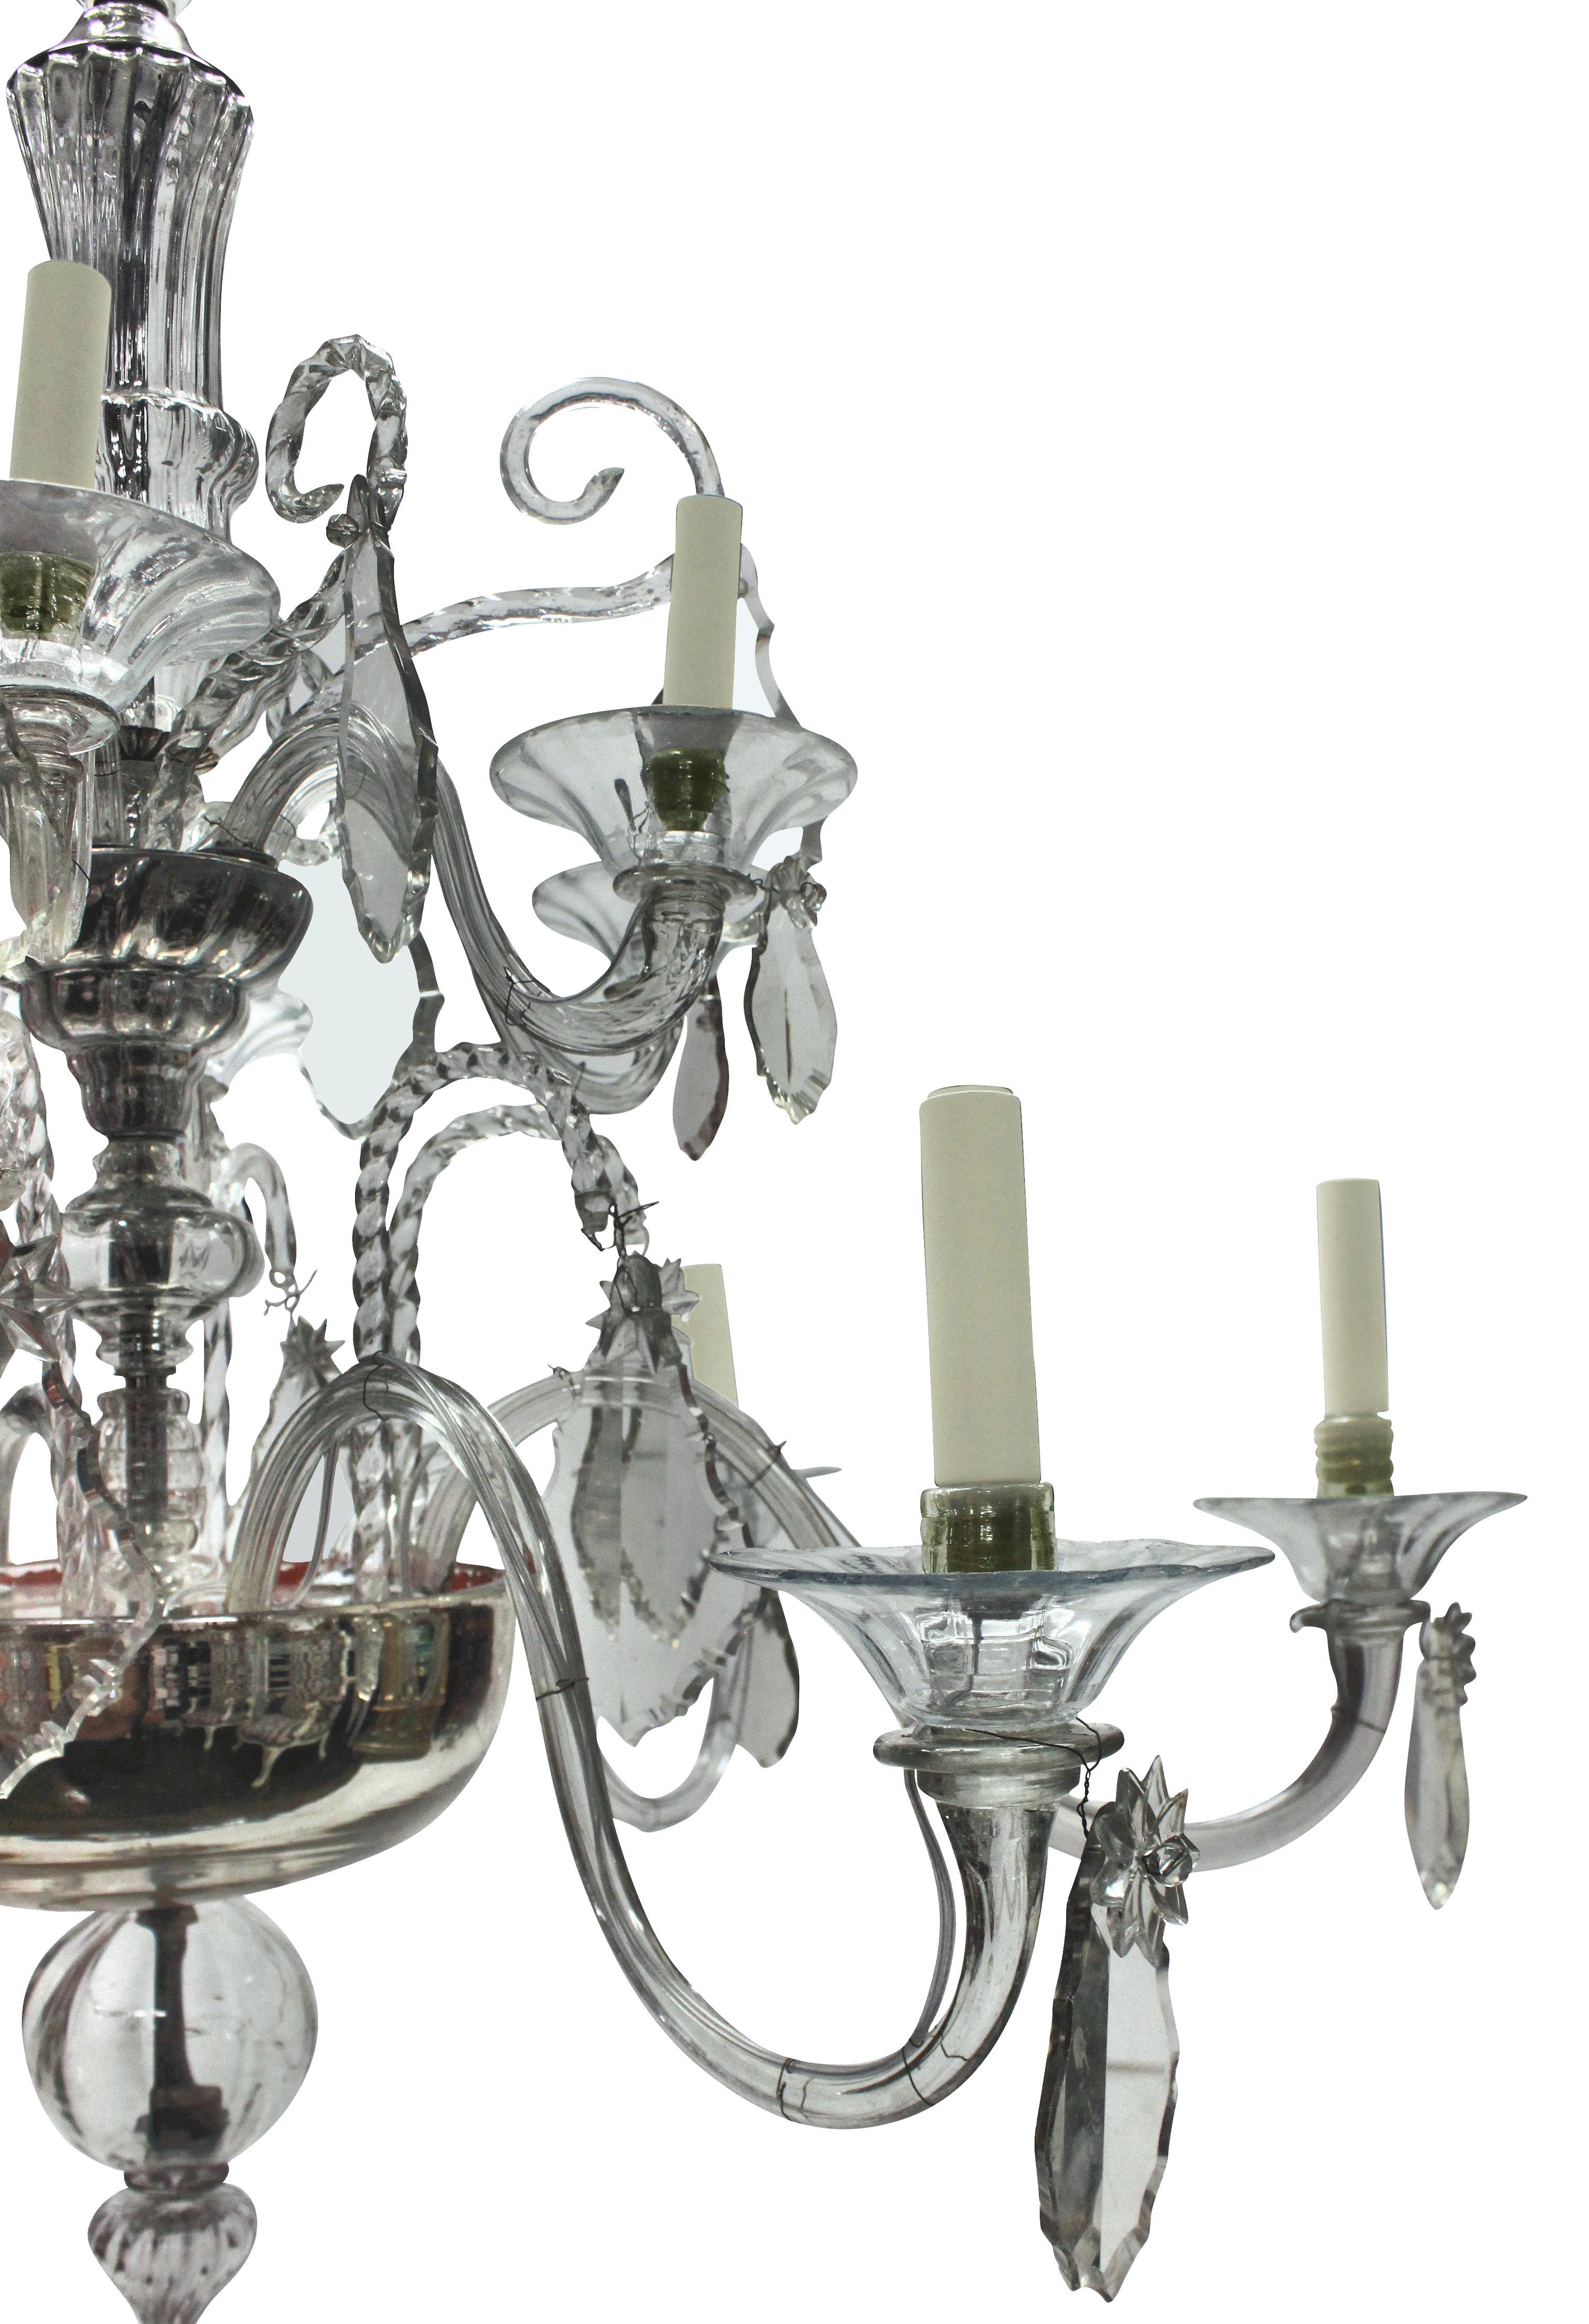 A large Venetian twelve branch chandelier of good quality in cut and moulded glass. With twelve deeply scrolled arms over two tiers, with a central bulbous stem, silvered receiver dishes, glass scrolls and pendant drops.